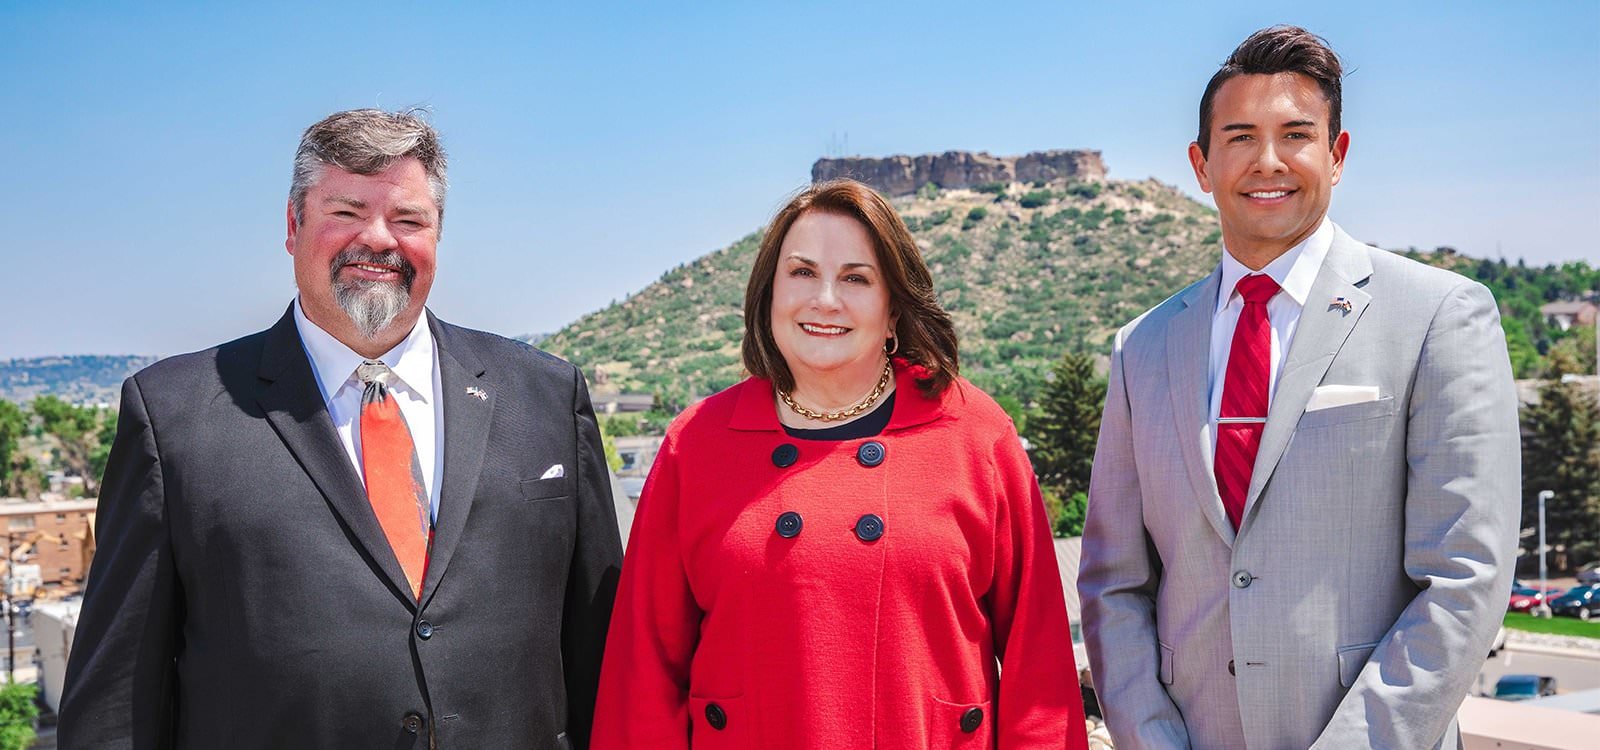 Board of Douglas County Commissioners: George Teal; Lora Thomas, Chair; Abe Laydon, Vice Chair